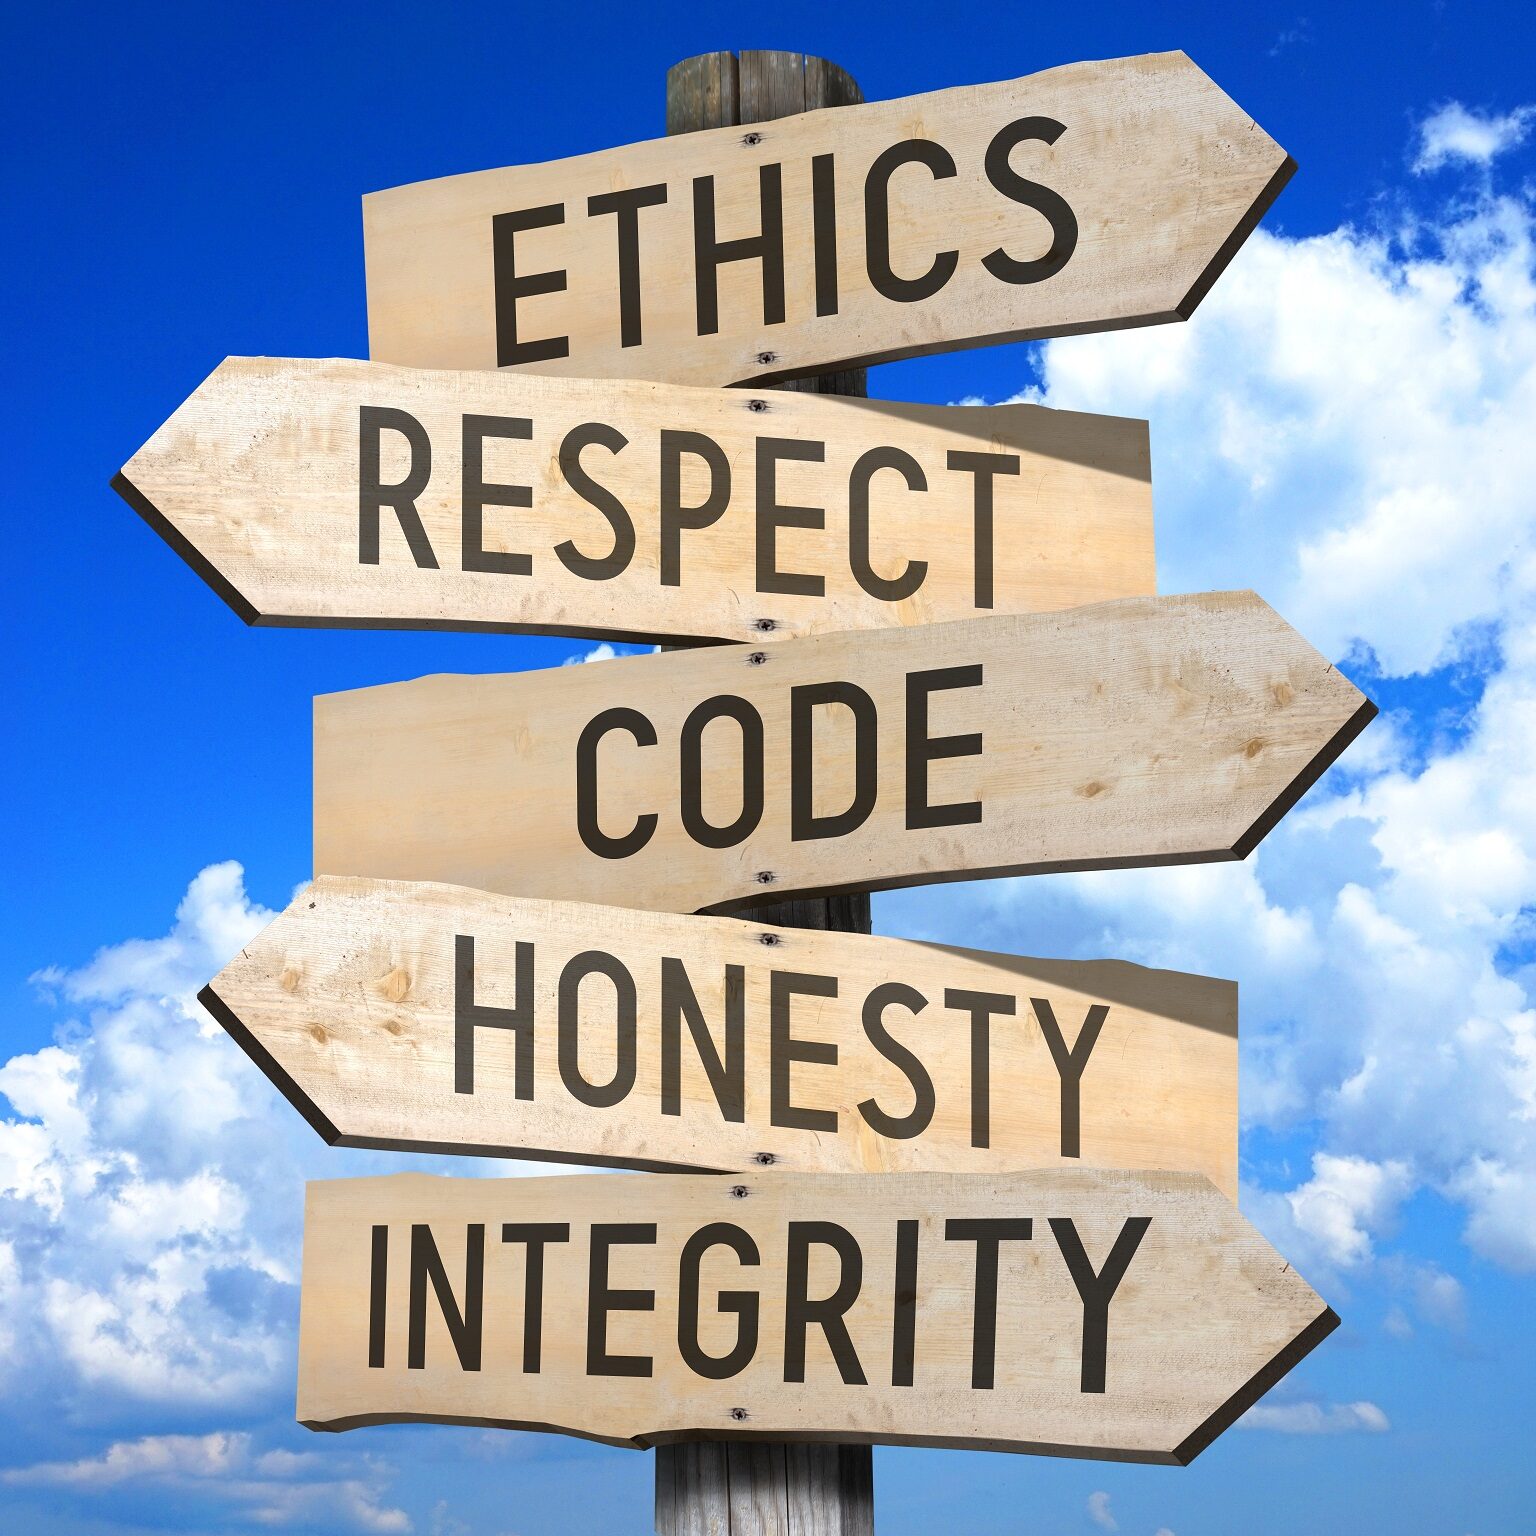 Wooden signpost - code of conduct (ethics, respect, code, honesty, integrity).